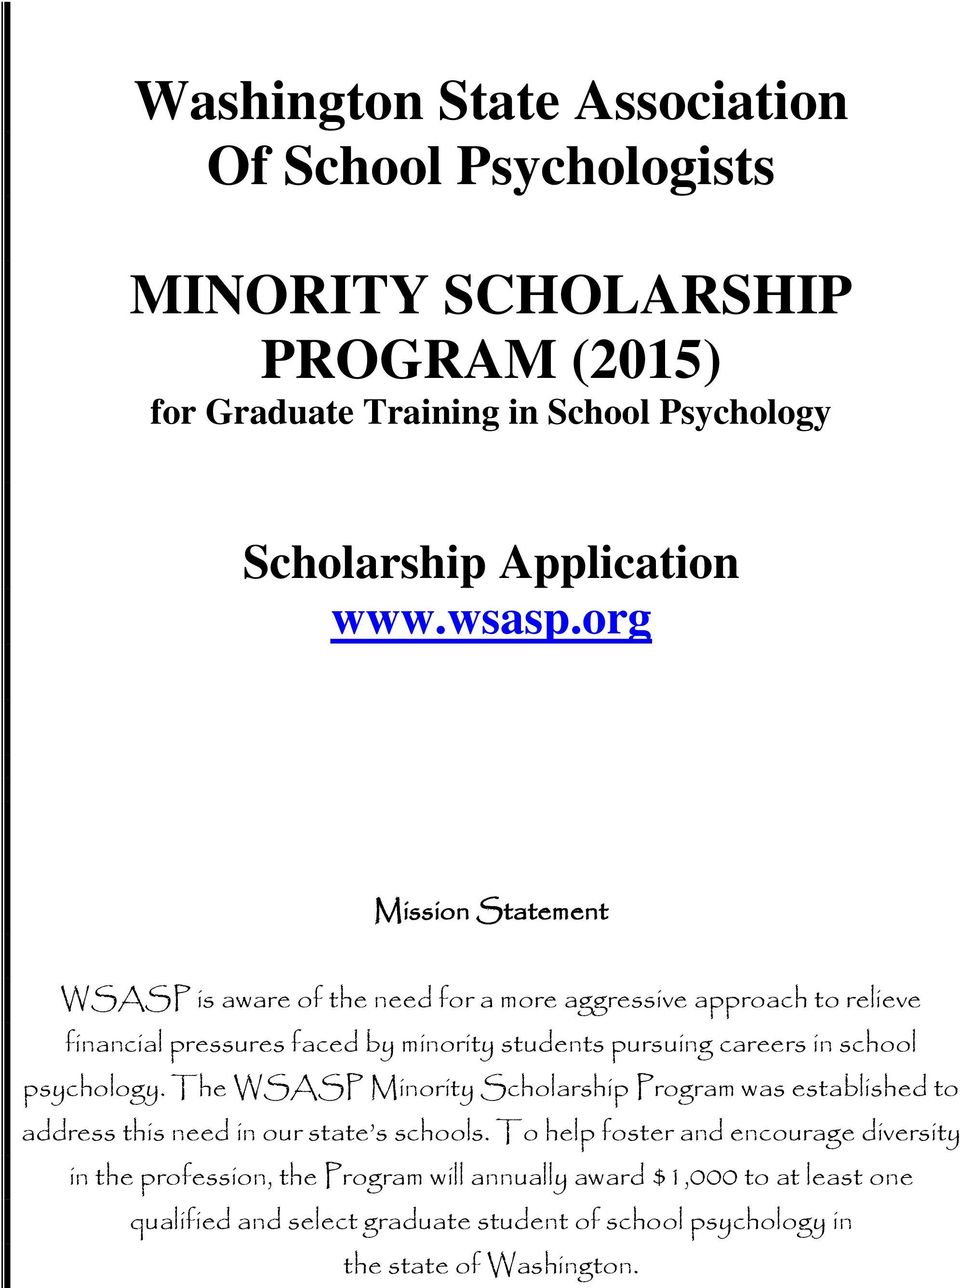 org Mission Statement WSASP is aware of the need for a more aggressive approach to relieve financial pressures faced by minority students pursuing careers in